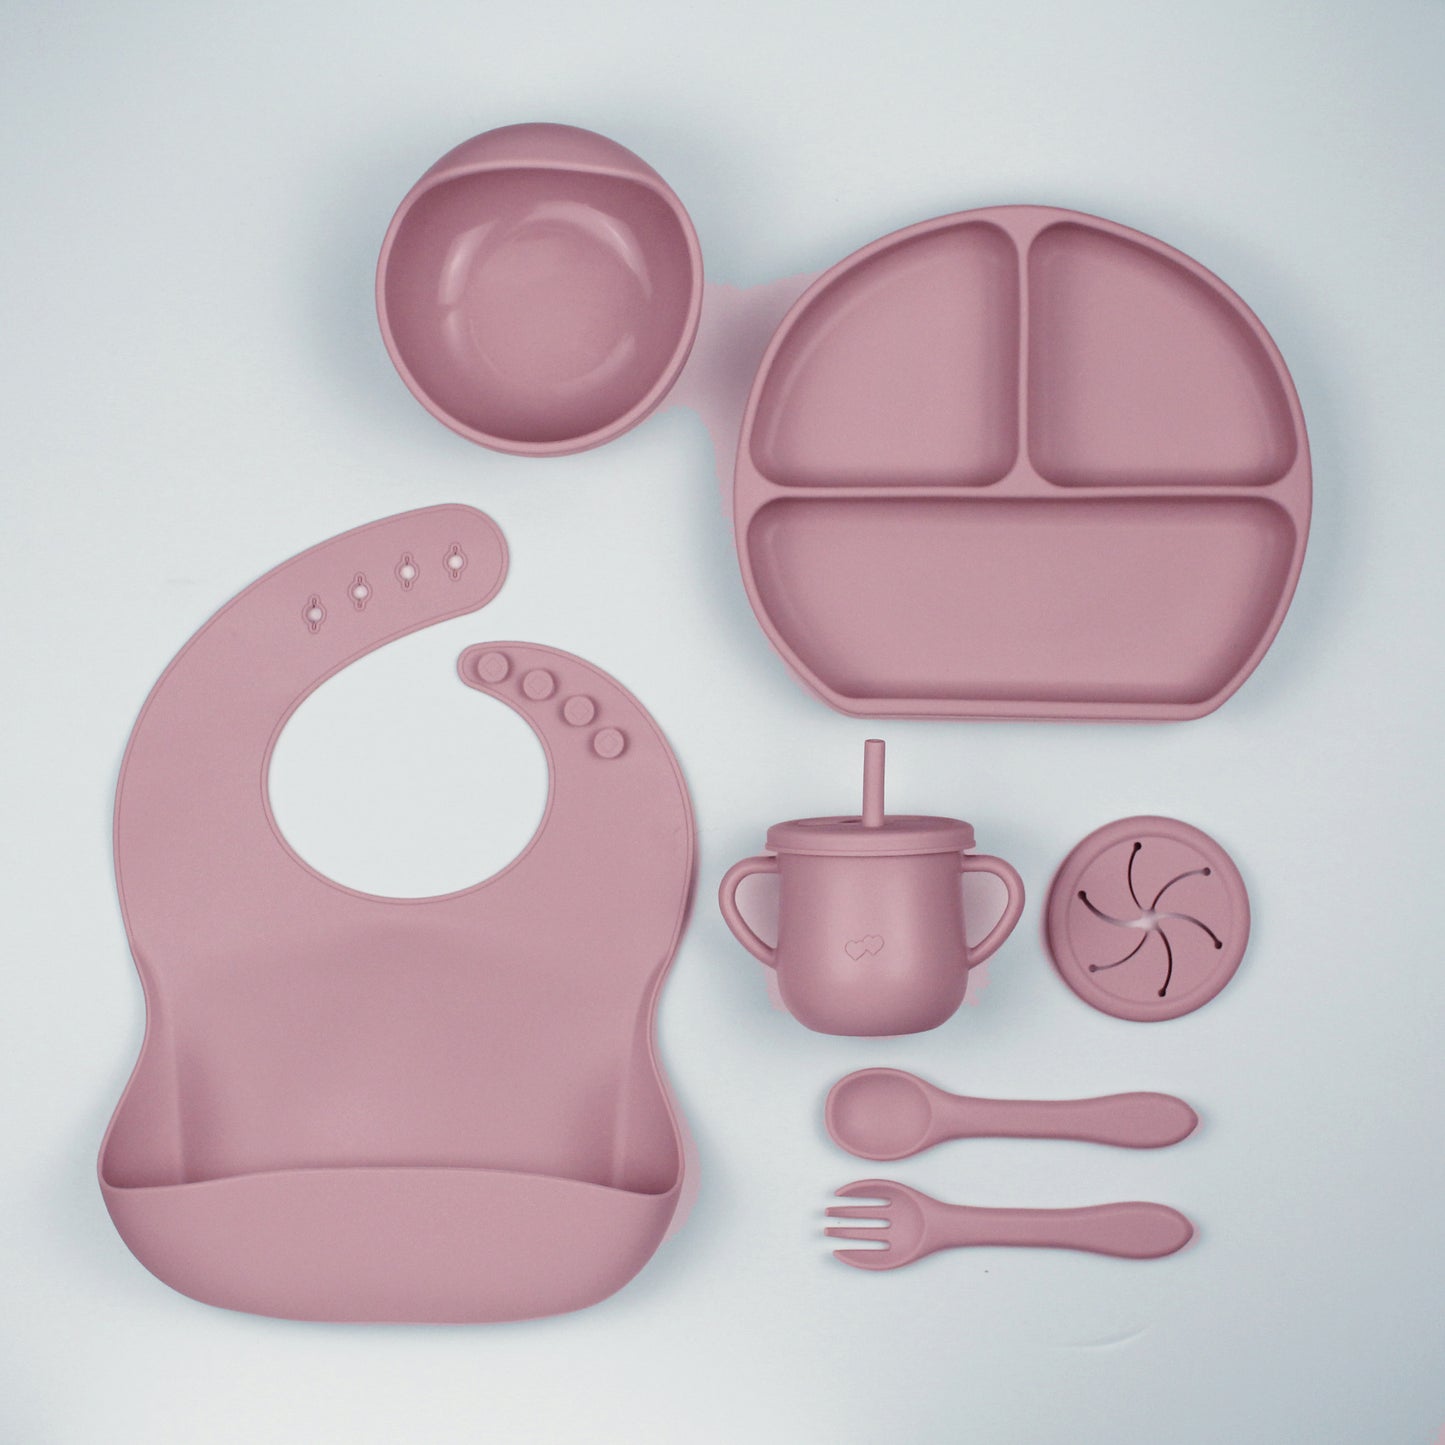 baby weaning 7 pc gift set in sweet pink